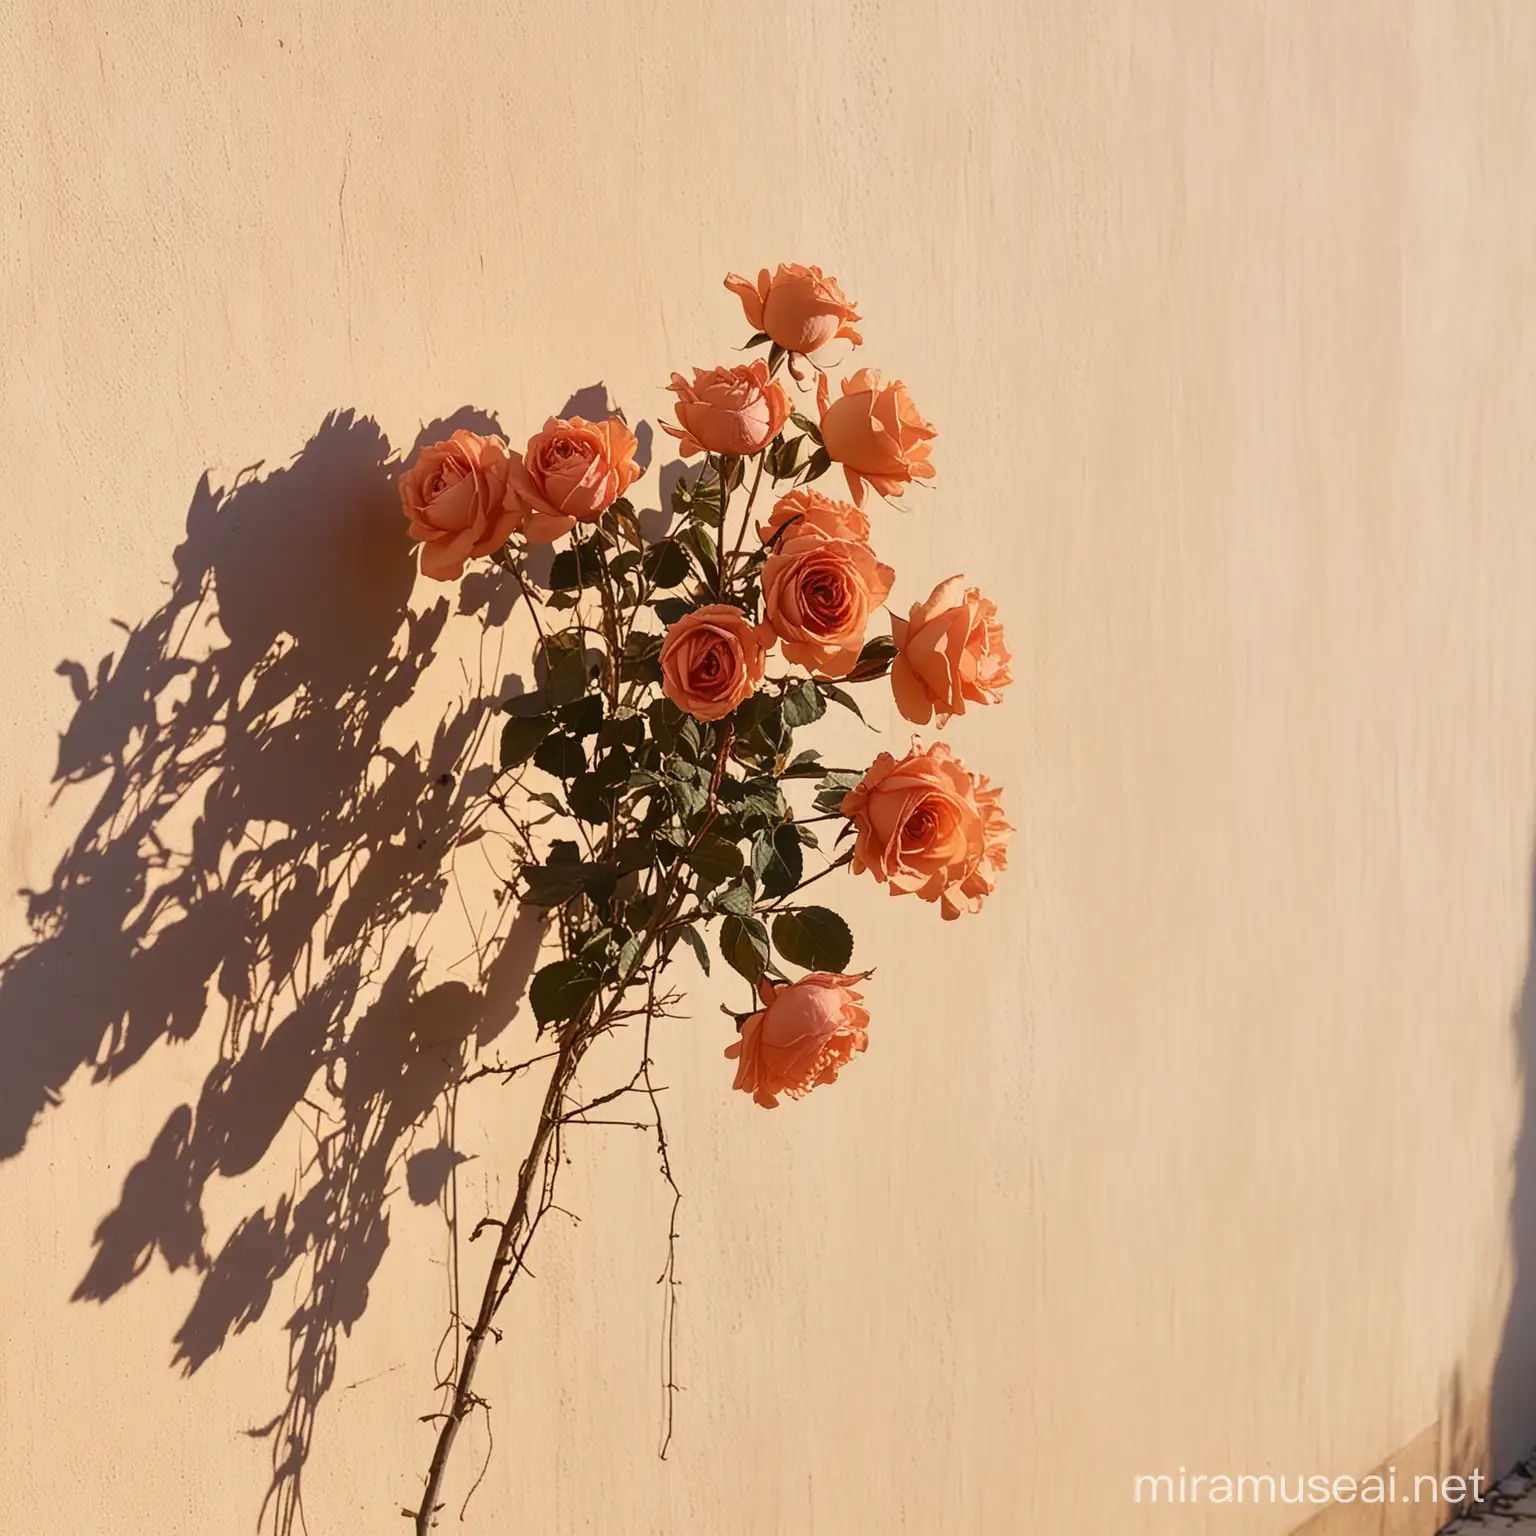 SunsetTinted Dry Roses Casting Shadows on a Wall